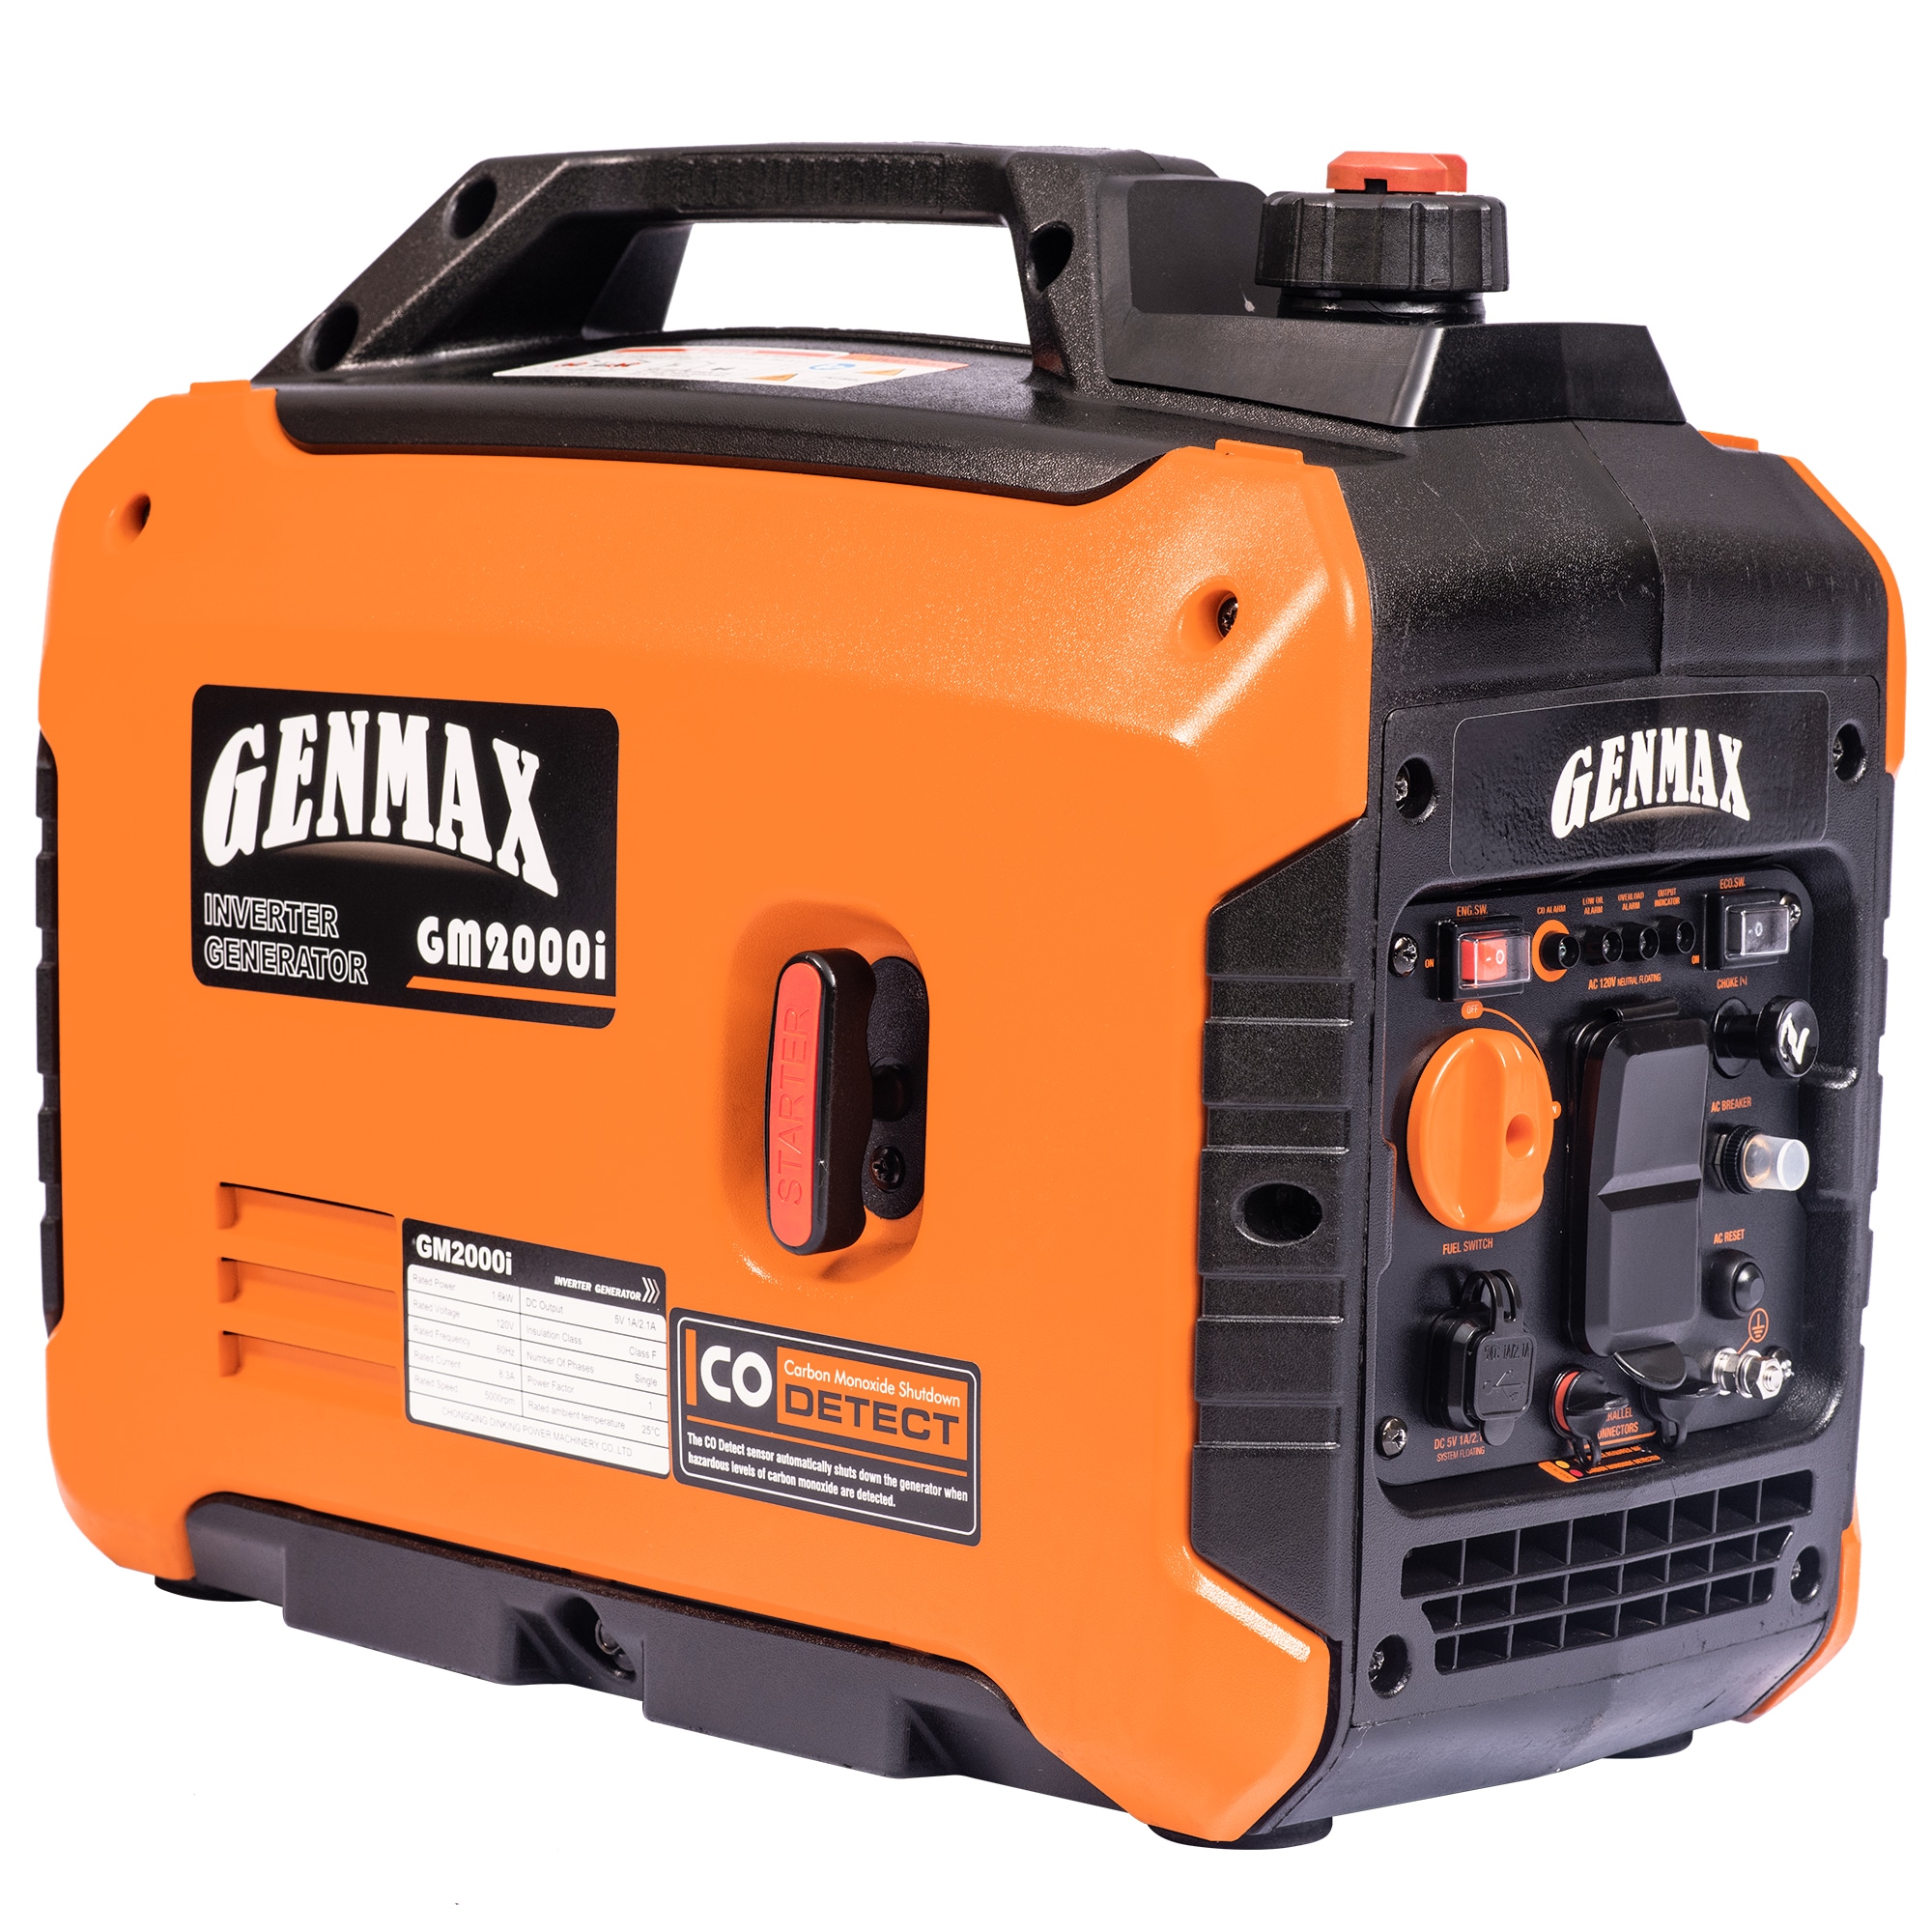 PowerSmart 2500W Portable Inverter Gas Generator for Home Use